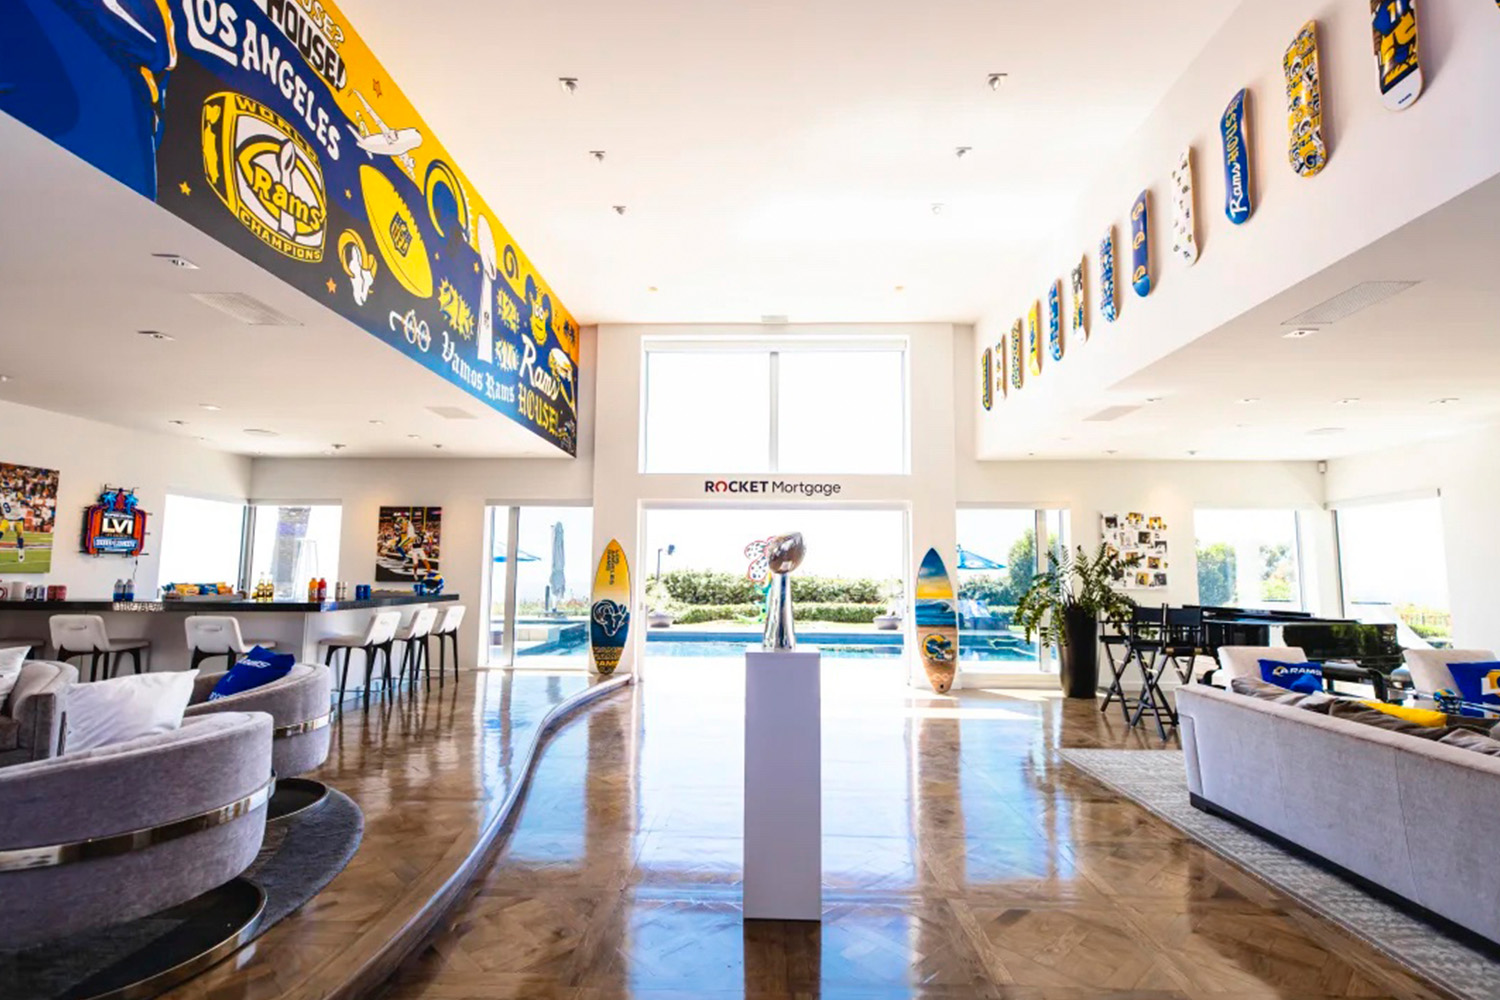 Rams Will Make Draft Picks from Luxury of Hollywood Hills Mansion